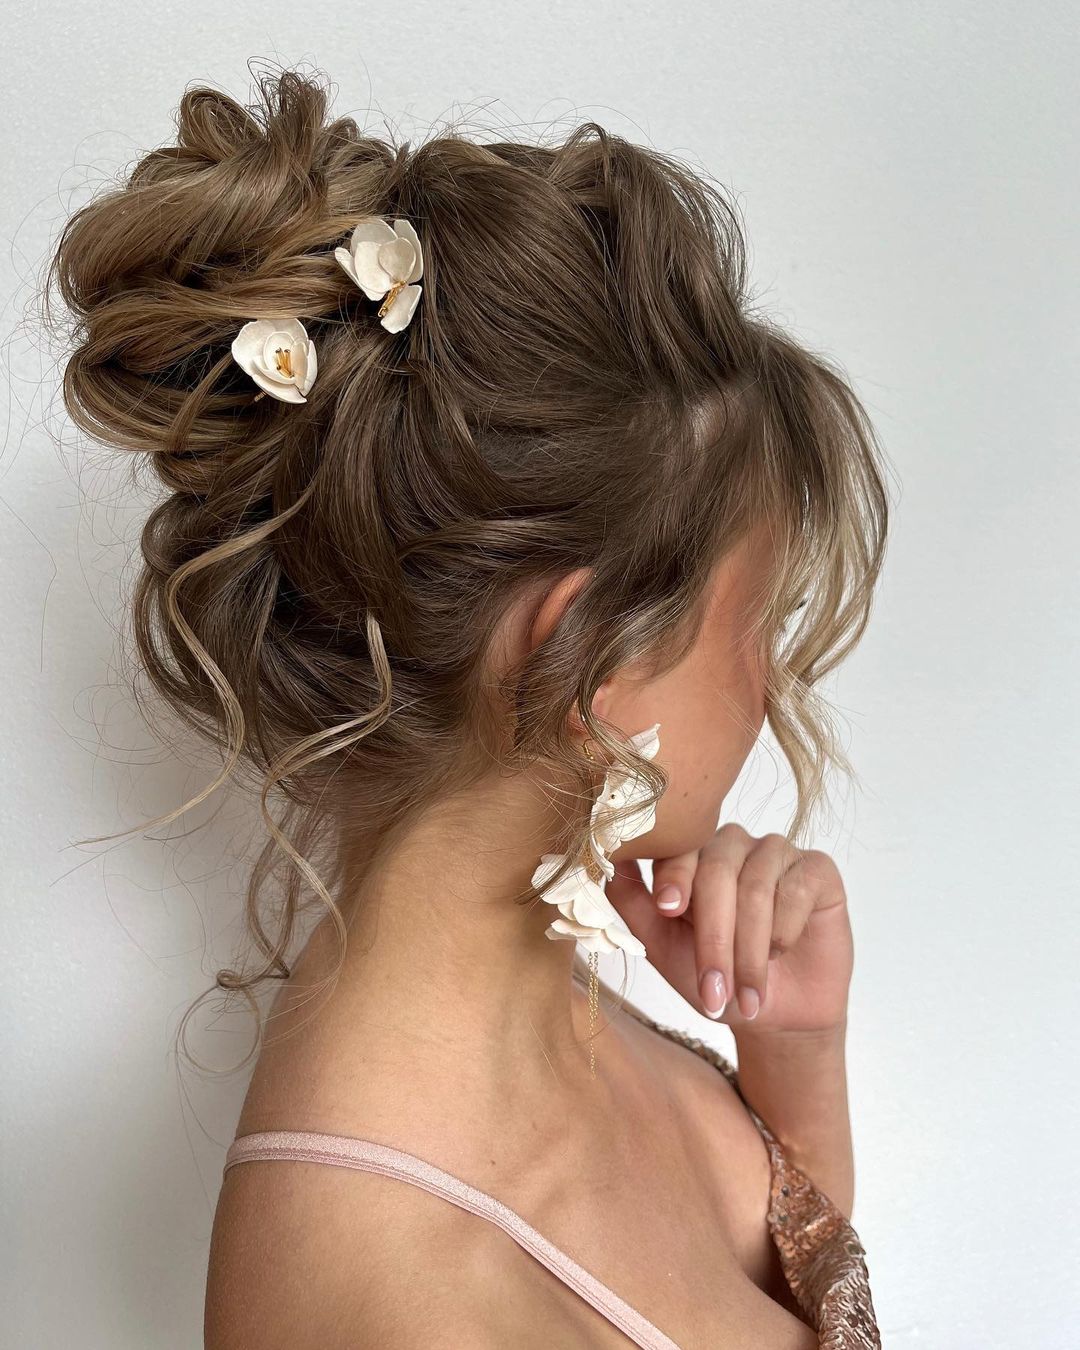 messy high bun homecoming updo hairstyle with flowers via jeny.stylist